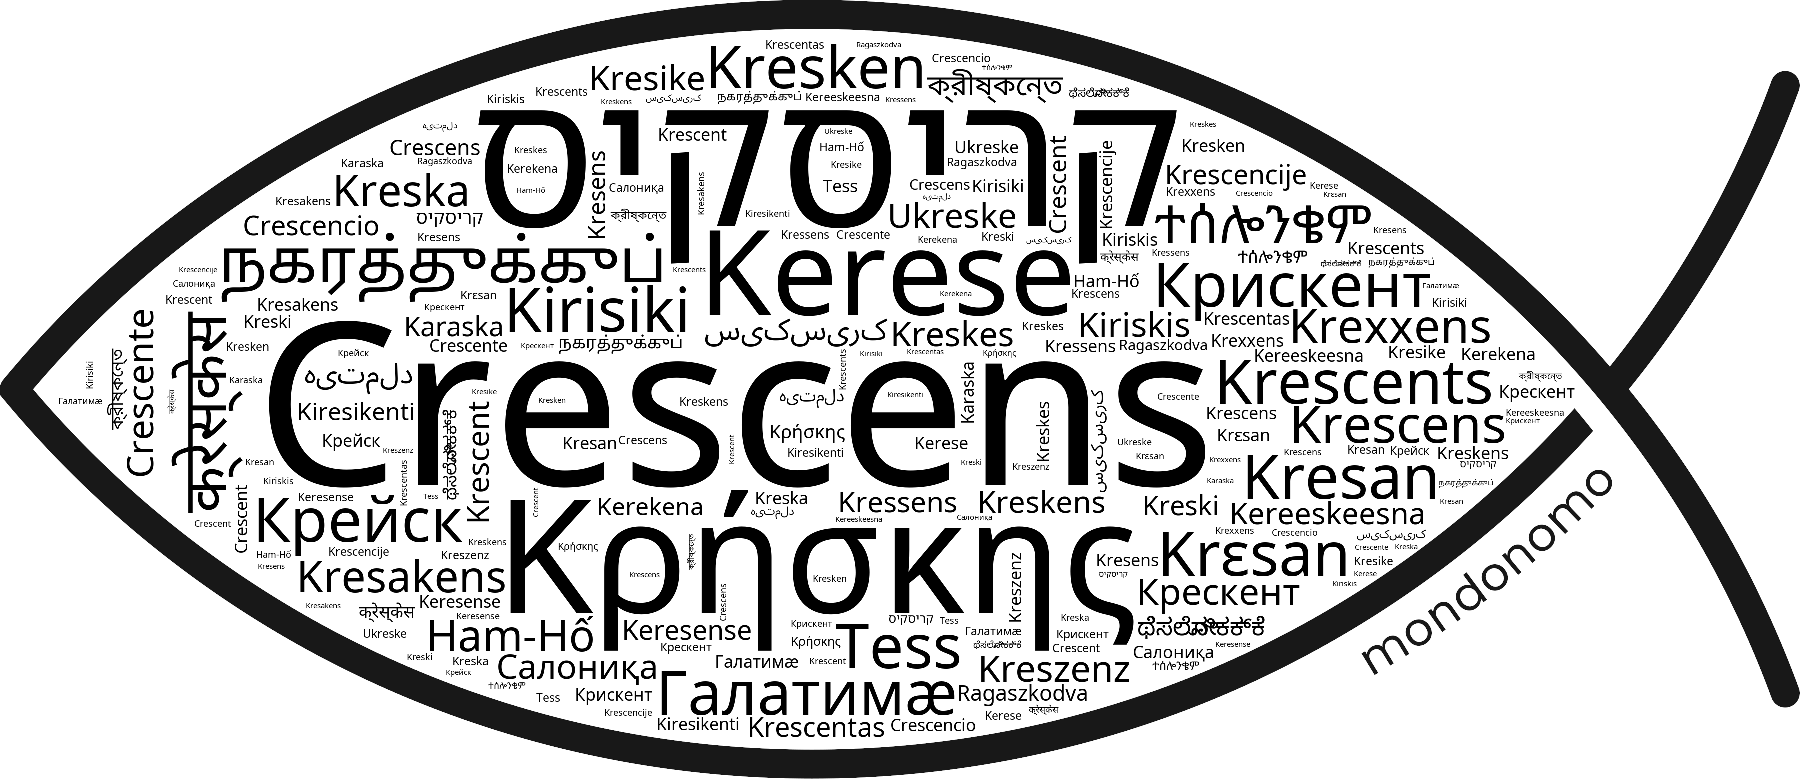 Name Crescens in the world's Bibles